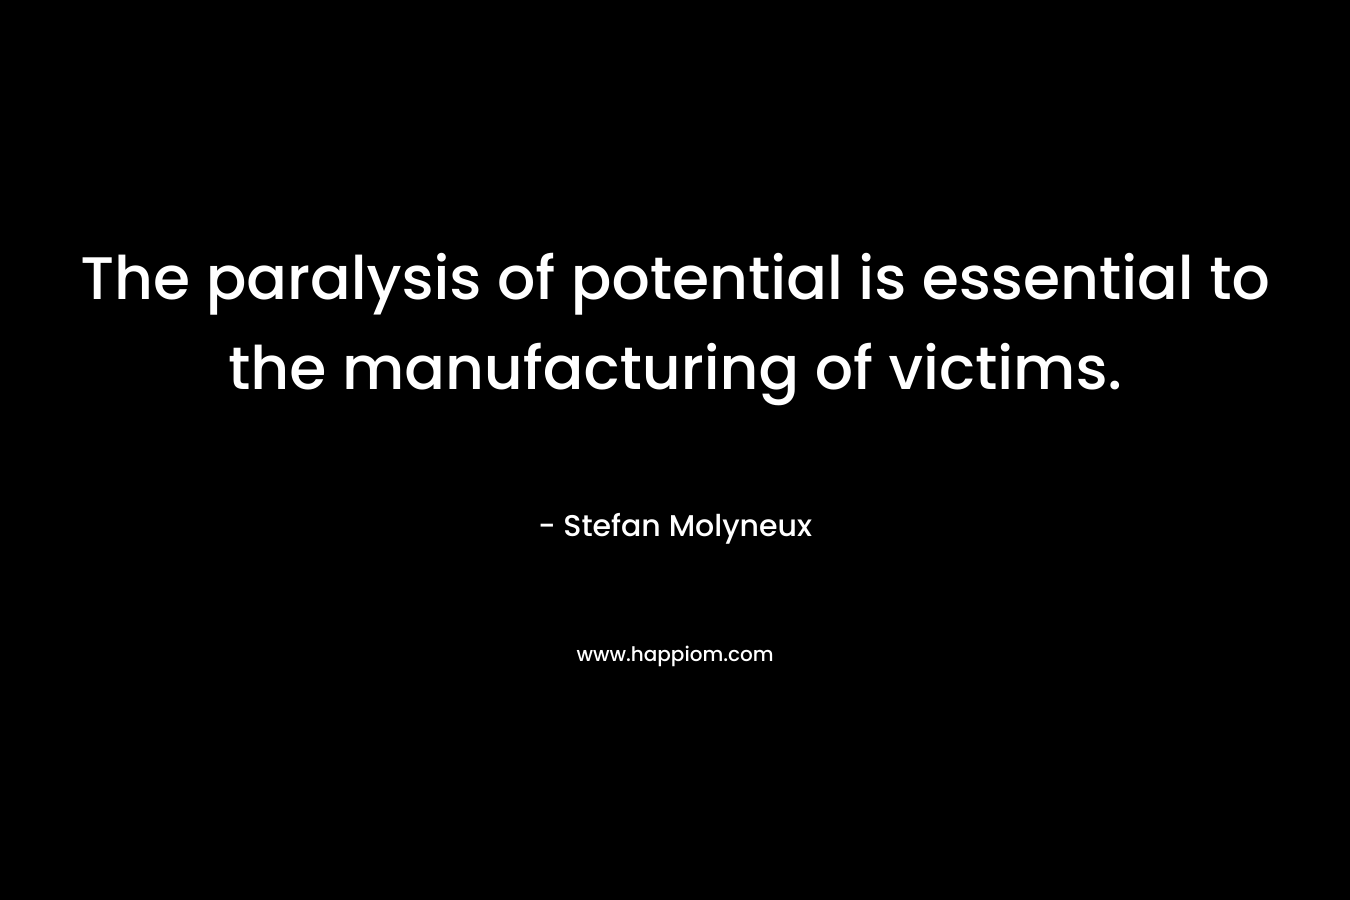 The paralysis of potential is essential to the manufacturing of victims. – Stefan Molyneux